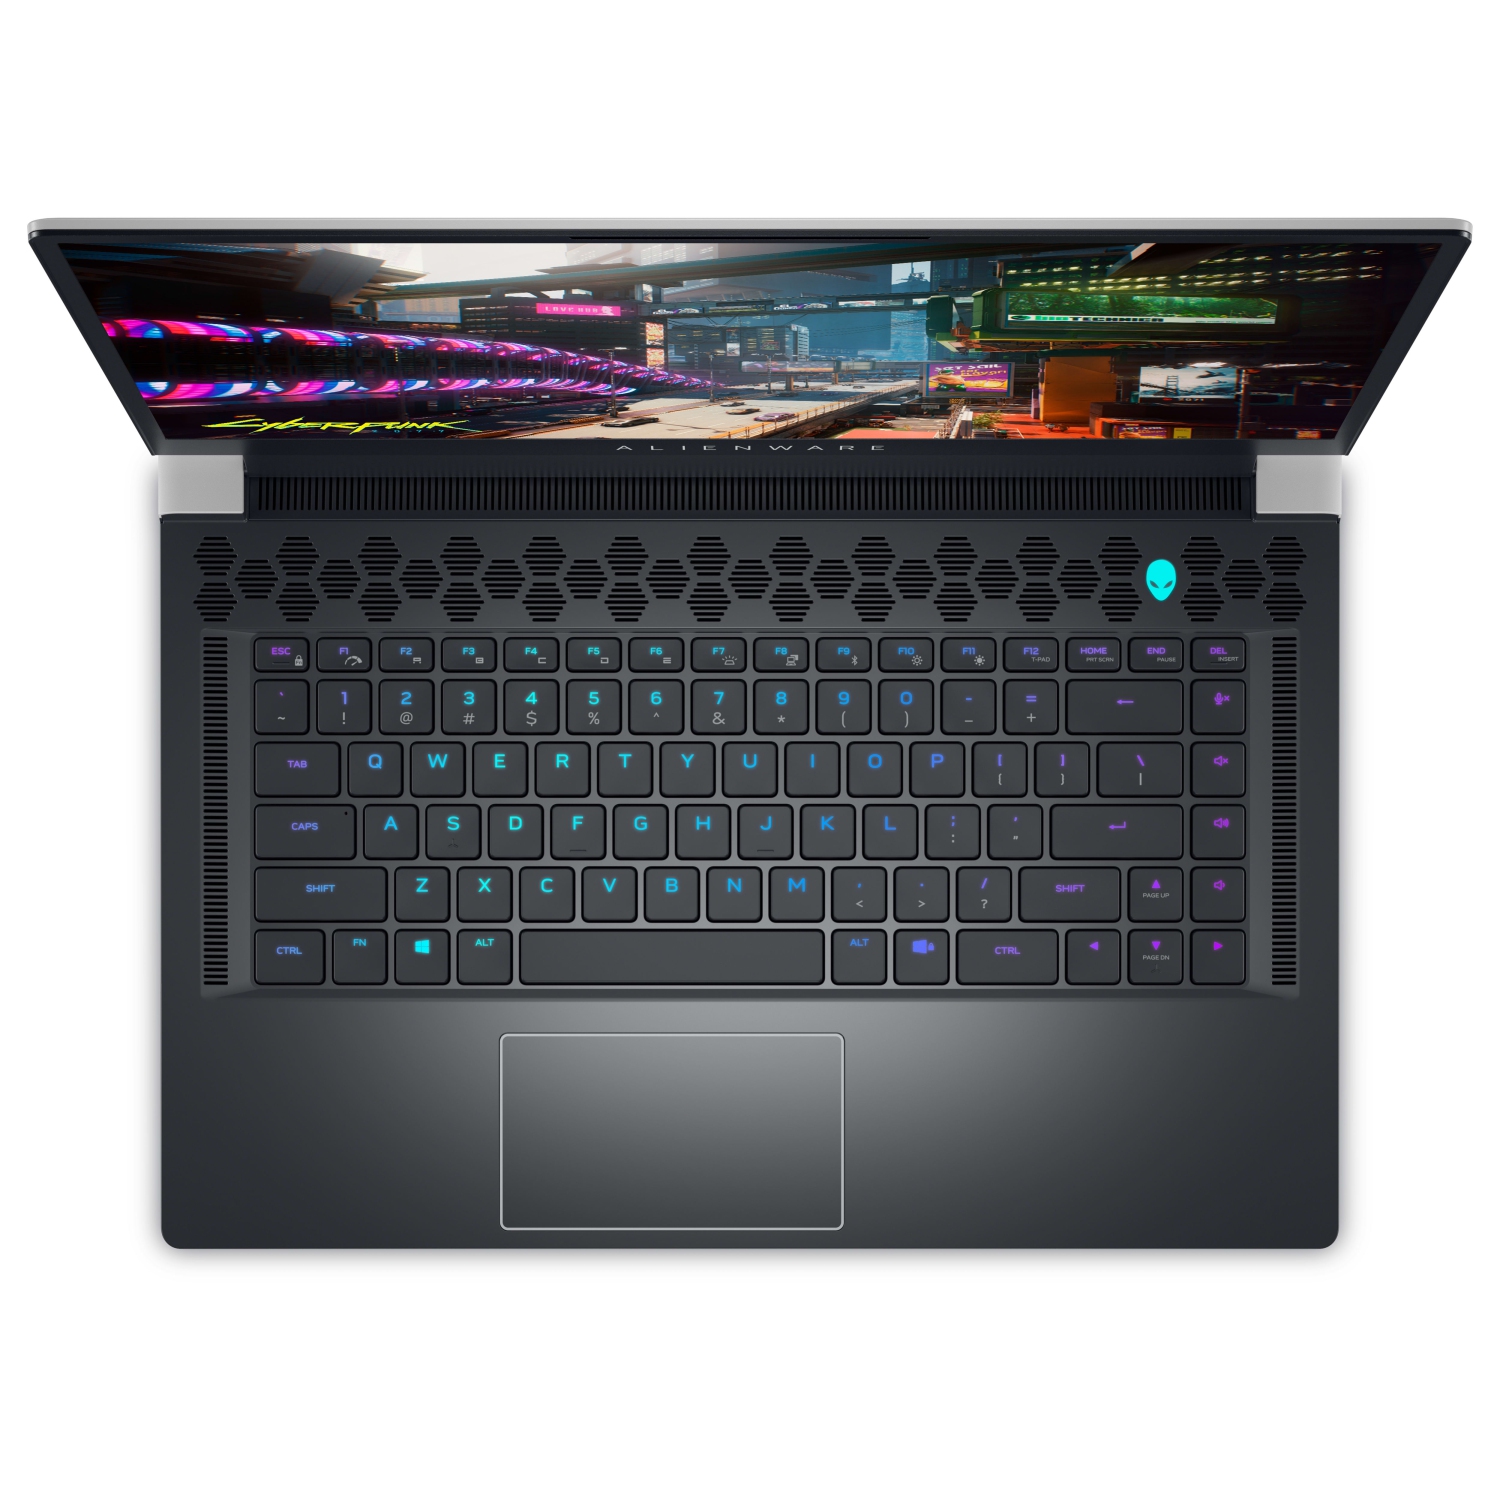 Refurbished (Excellent) – Dell Alienware X15 R2 Gaming Laptop (2022) | 15.6" FHD | Core i9 - 1TB SSD - 32GB RAM - 3070 Ti | 14 Cores @ 5 GHz - 12th Gen CPU - 8GB GDDR5